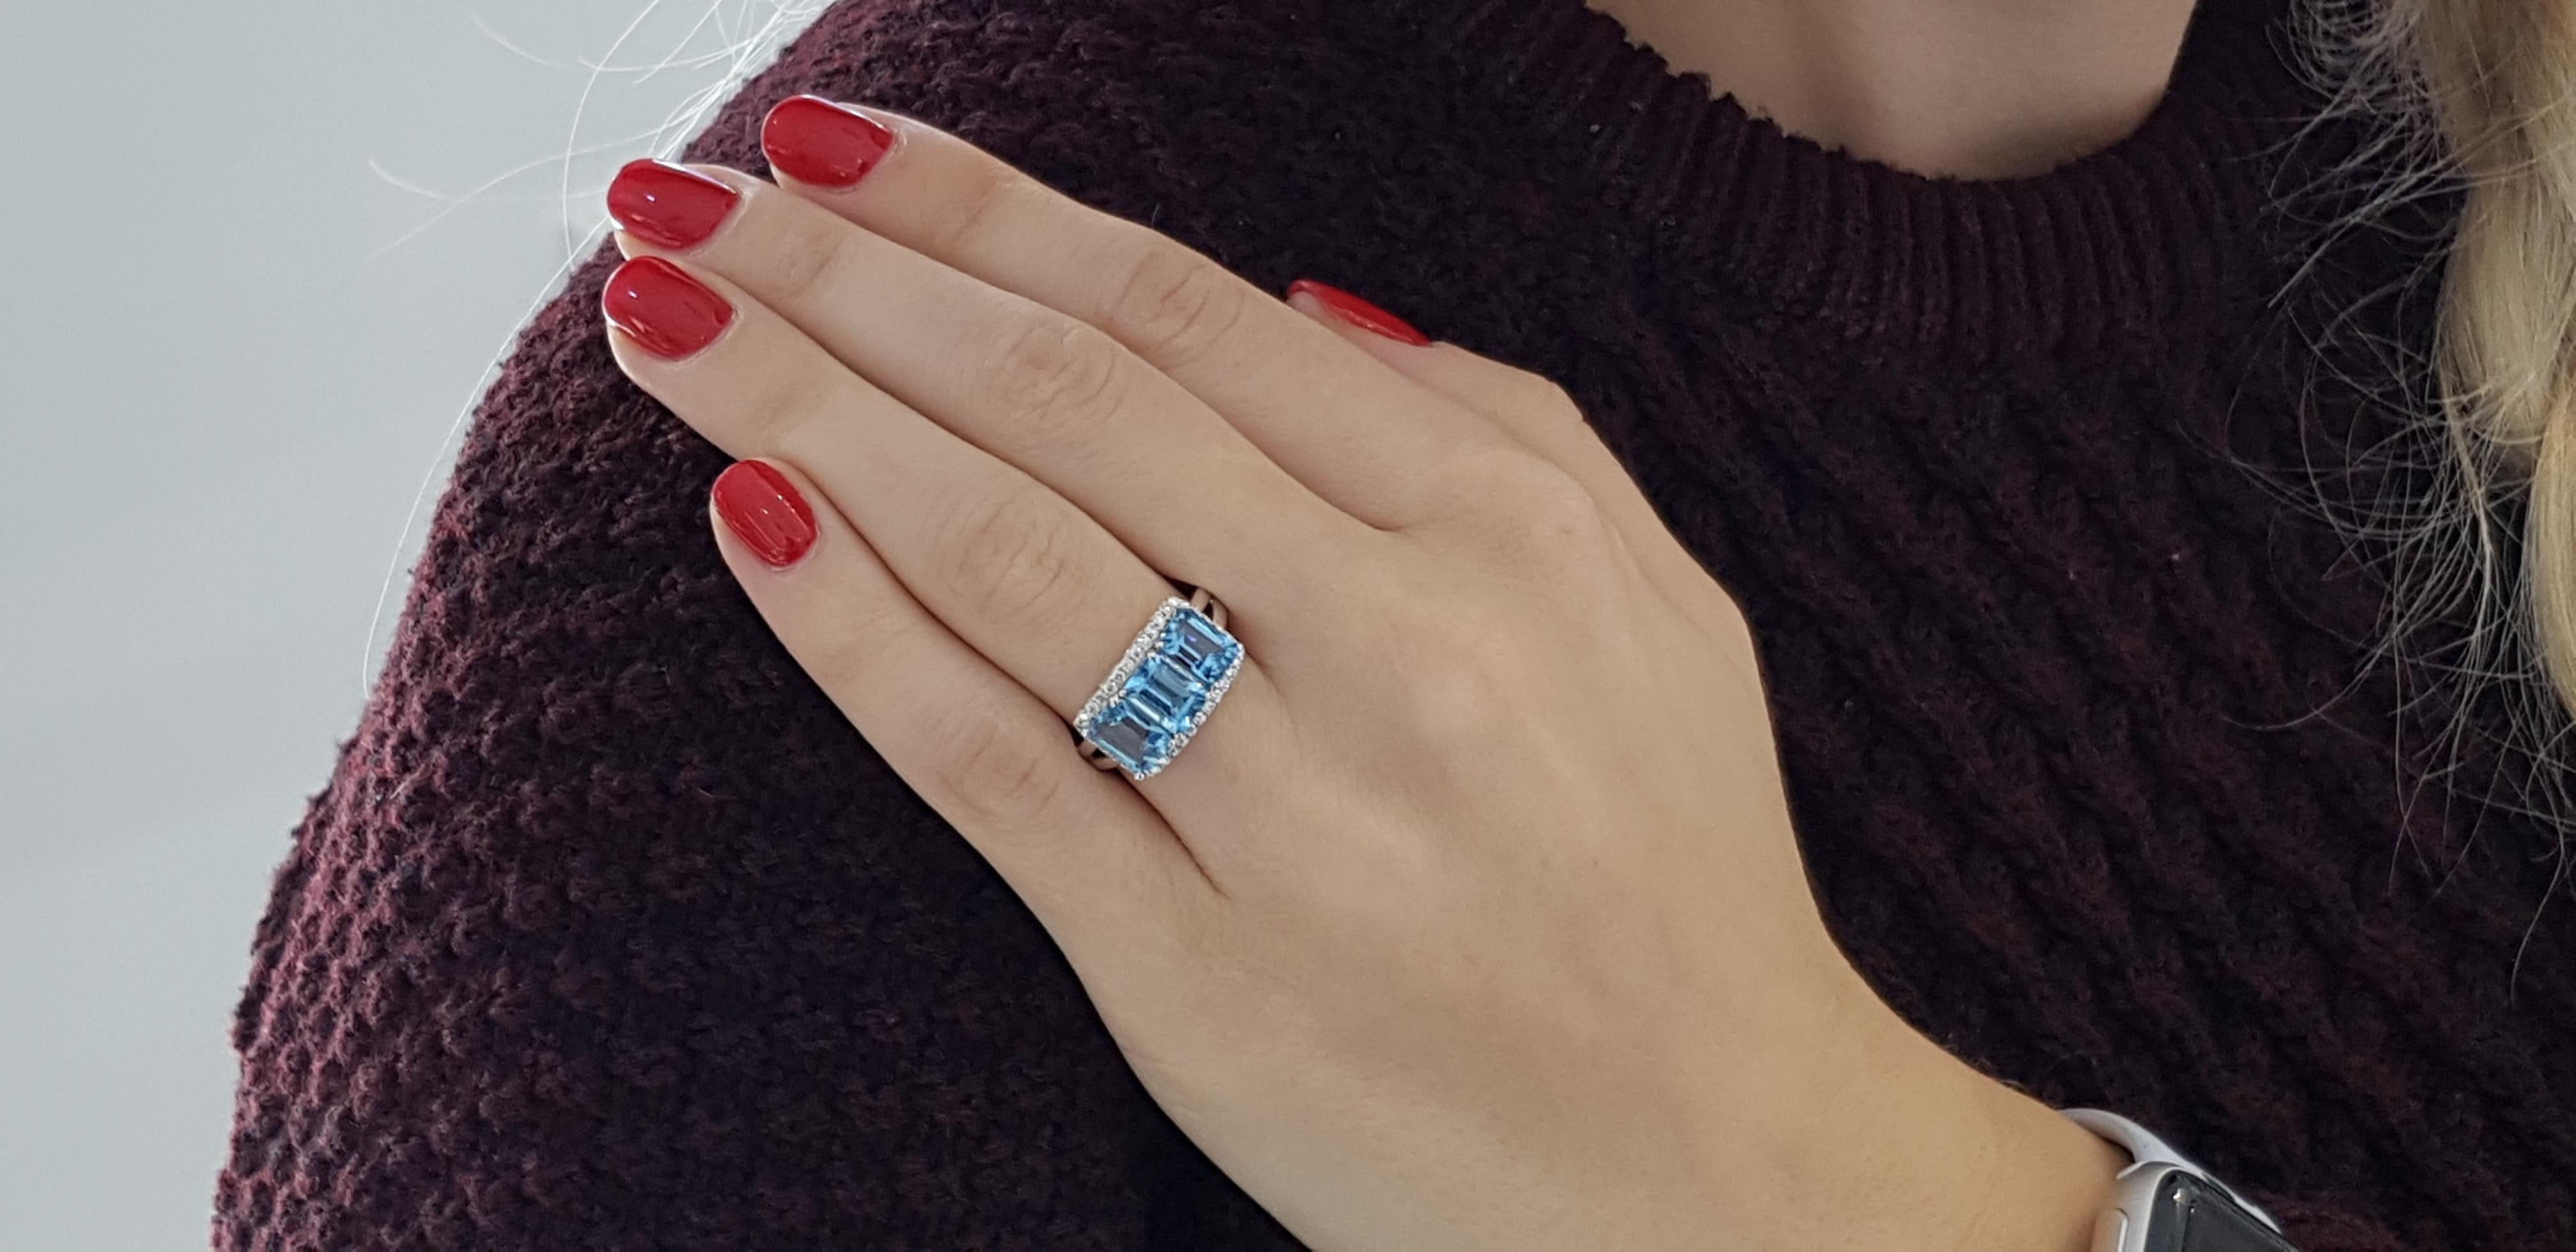 This beautiful 3 stone 3.83 Carat Blue Topaz engagement ring is surrounded by Halo of 0.25 Carat Round White Brilliant Cut Diamonds Color H Clarity SI and set in 18 Karat white gold split shank. Made with a British Hallmark from the London Assay